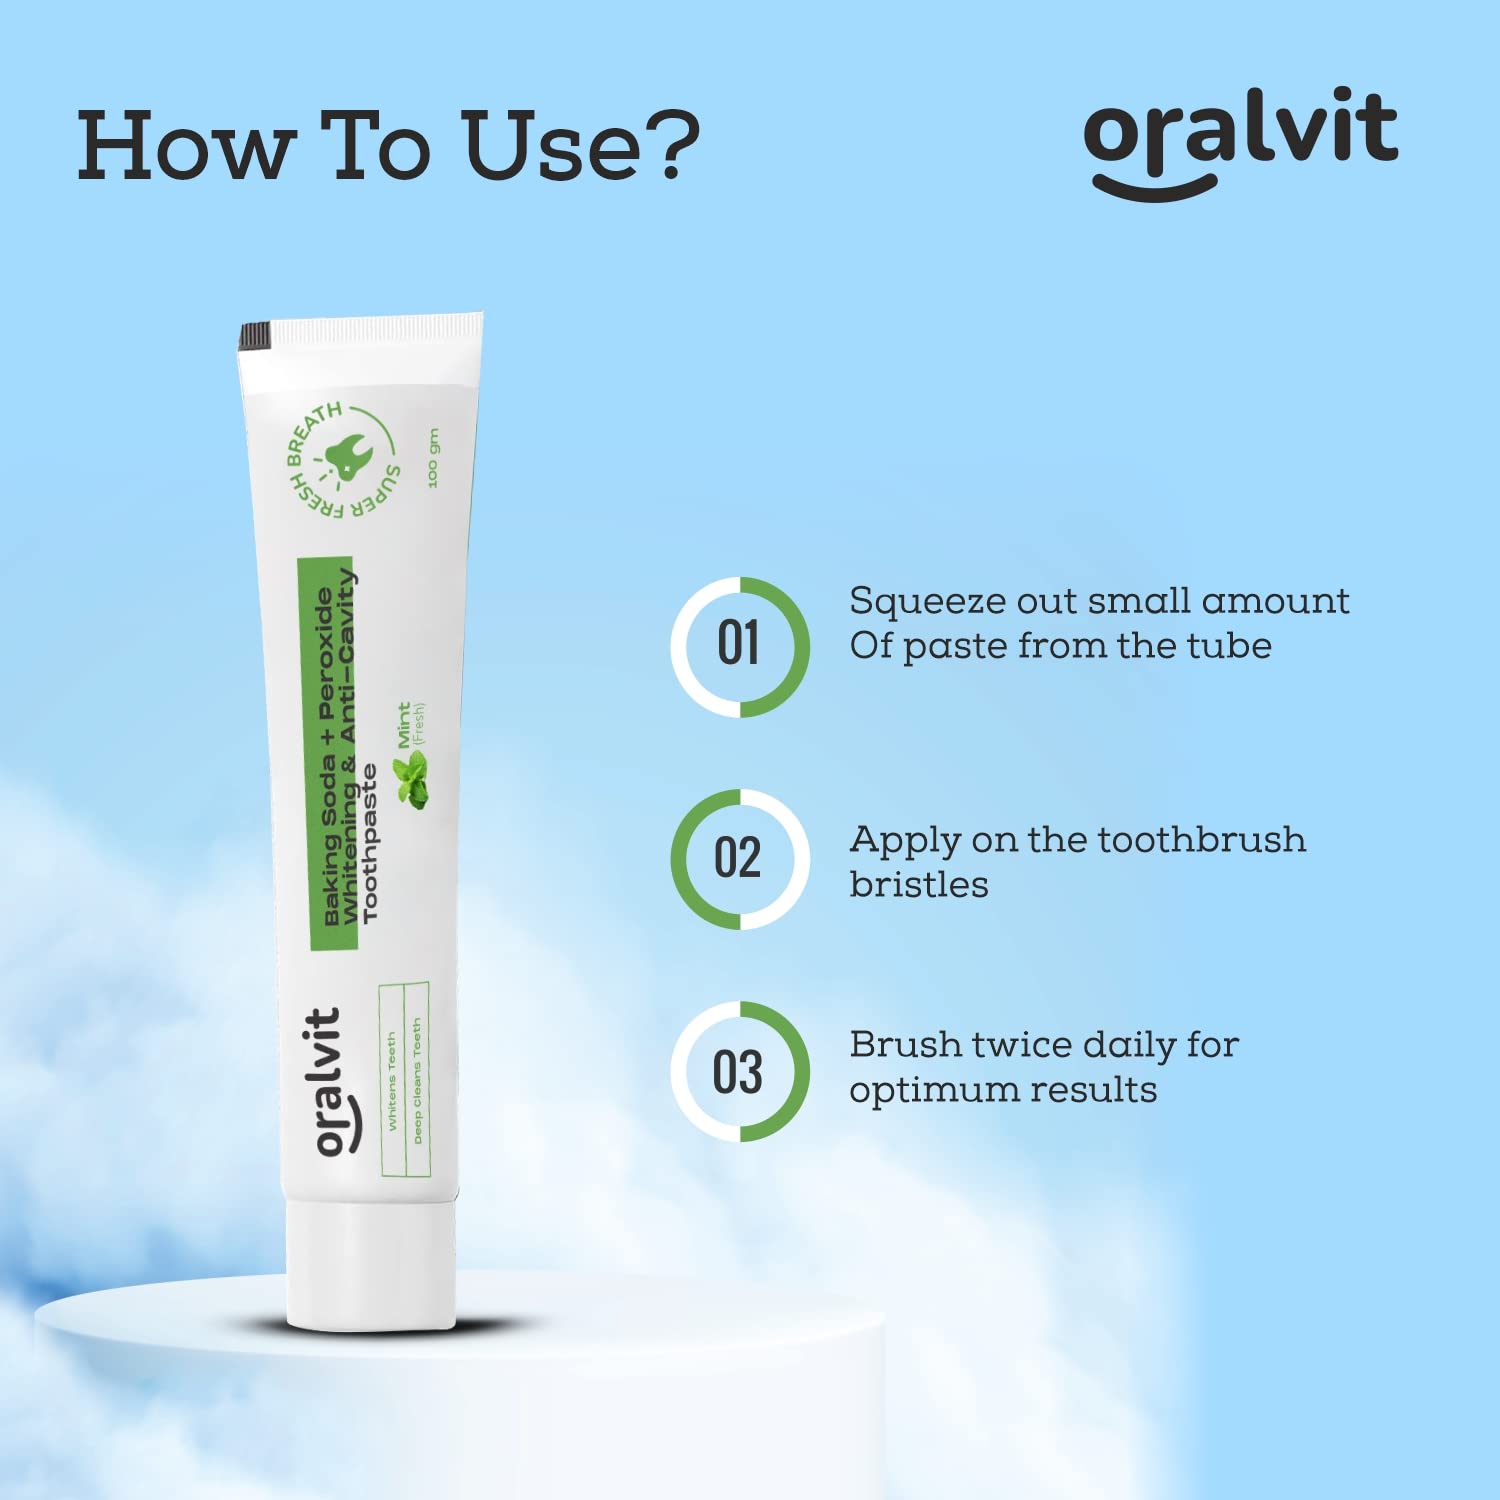 Oralvit Baking Soda and Peroxide Toothpaste for Whitening & Anti-Cavity | Toothpaste with Fresh Mint | Deep Cleanse |Super Fresh Breath | Extreme Whitening‚Äì 100gm Mint Flavour (Pack of 3)